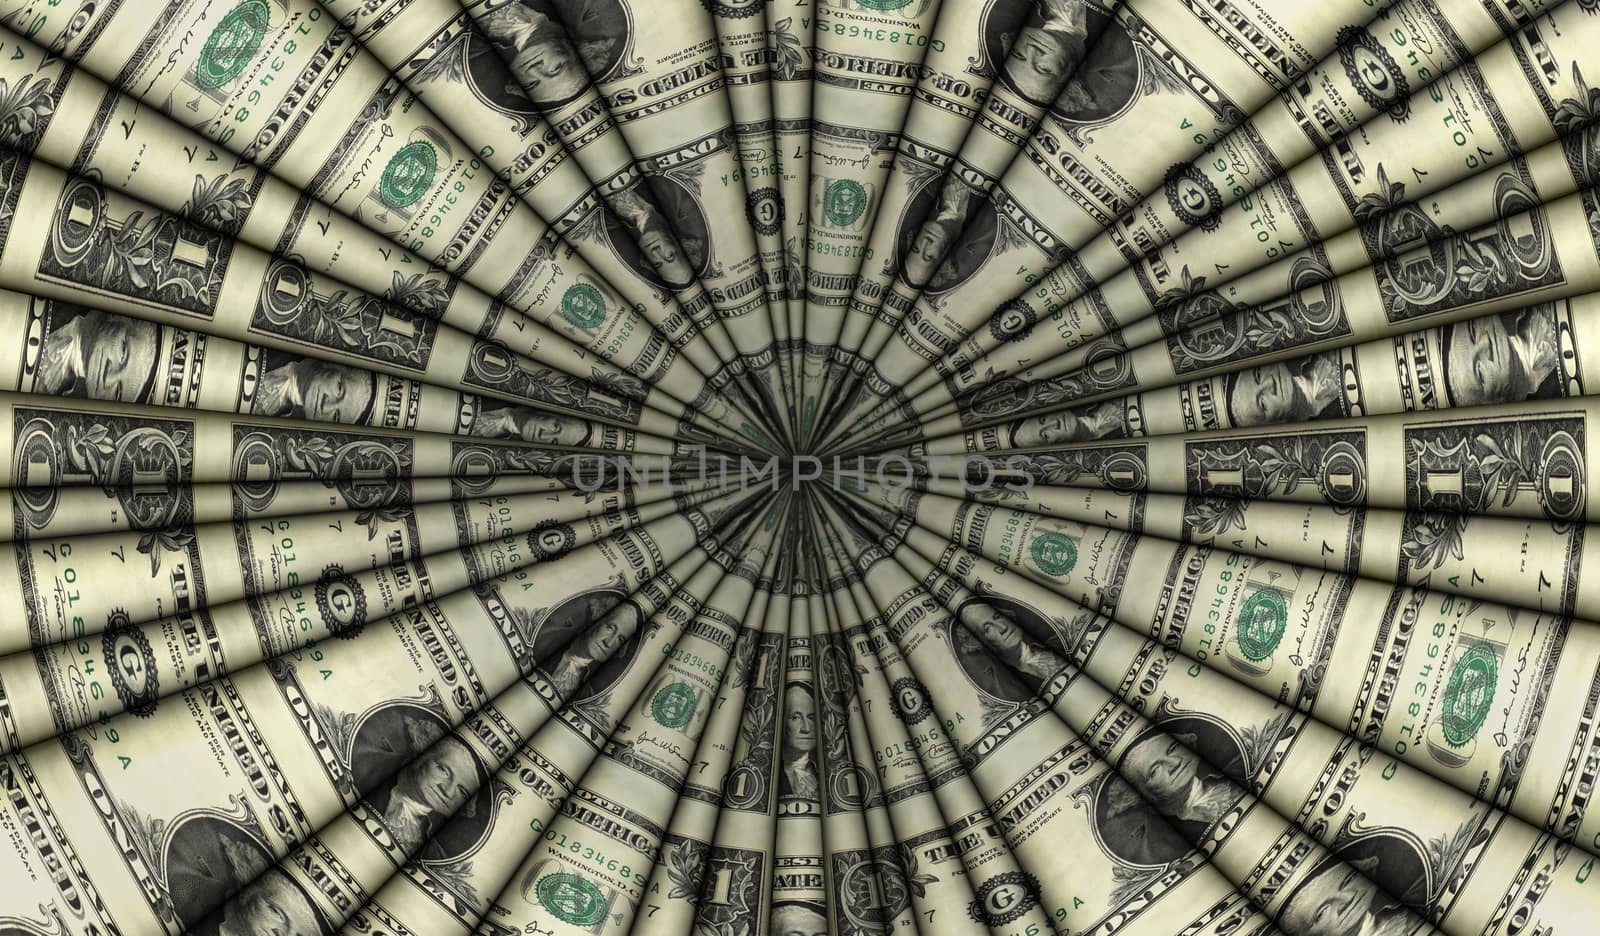 Photo illustration of the U.S. one dollar bills in cone shapes arranged around a center point like a roulette wheel.